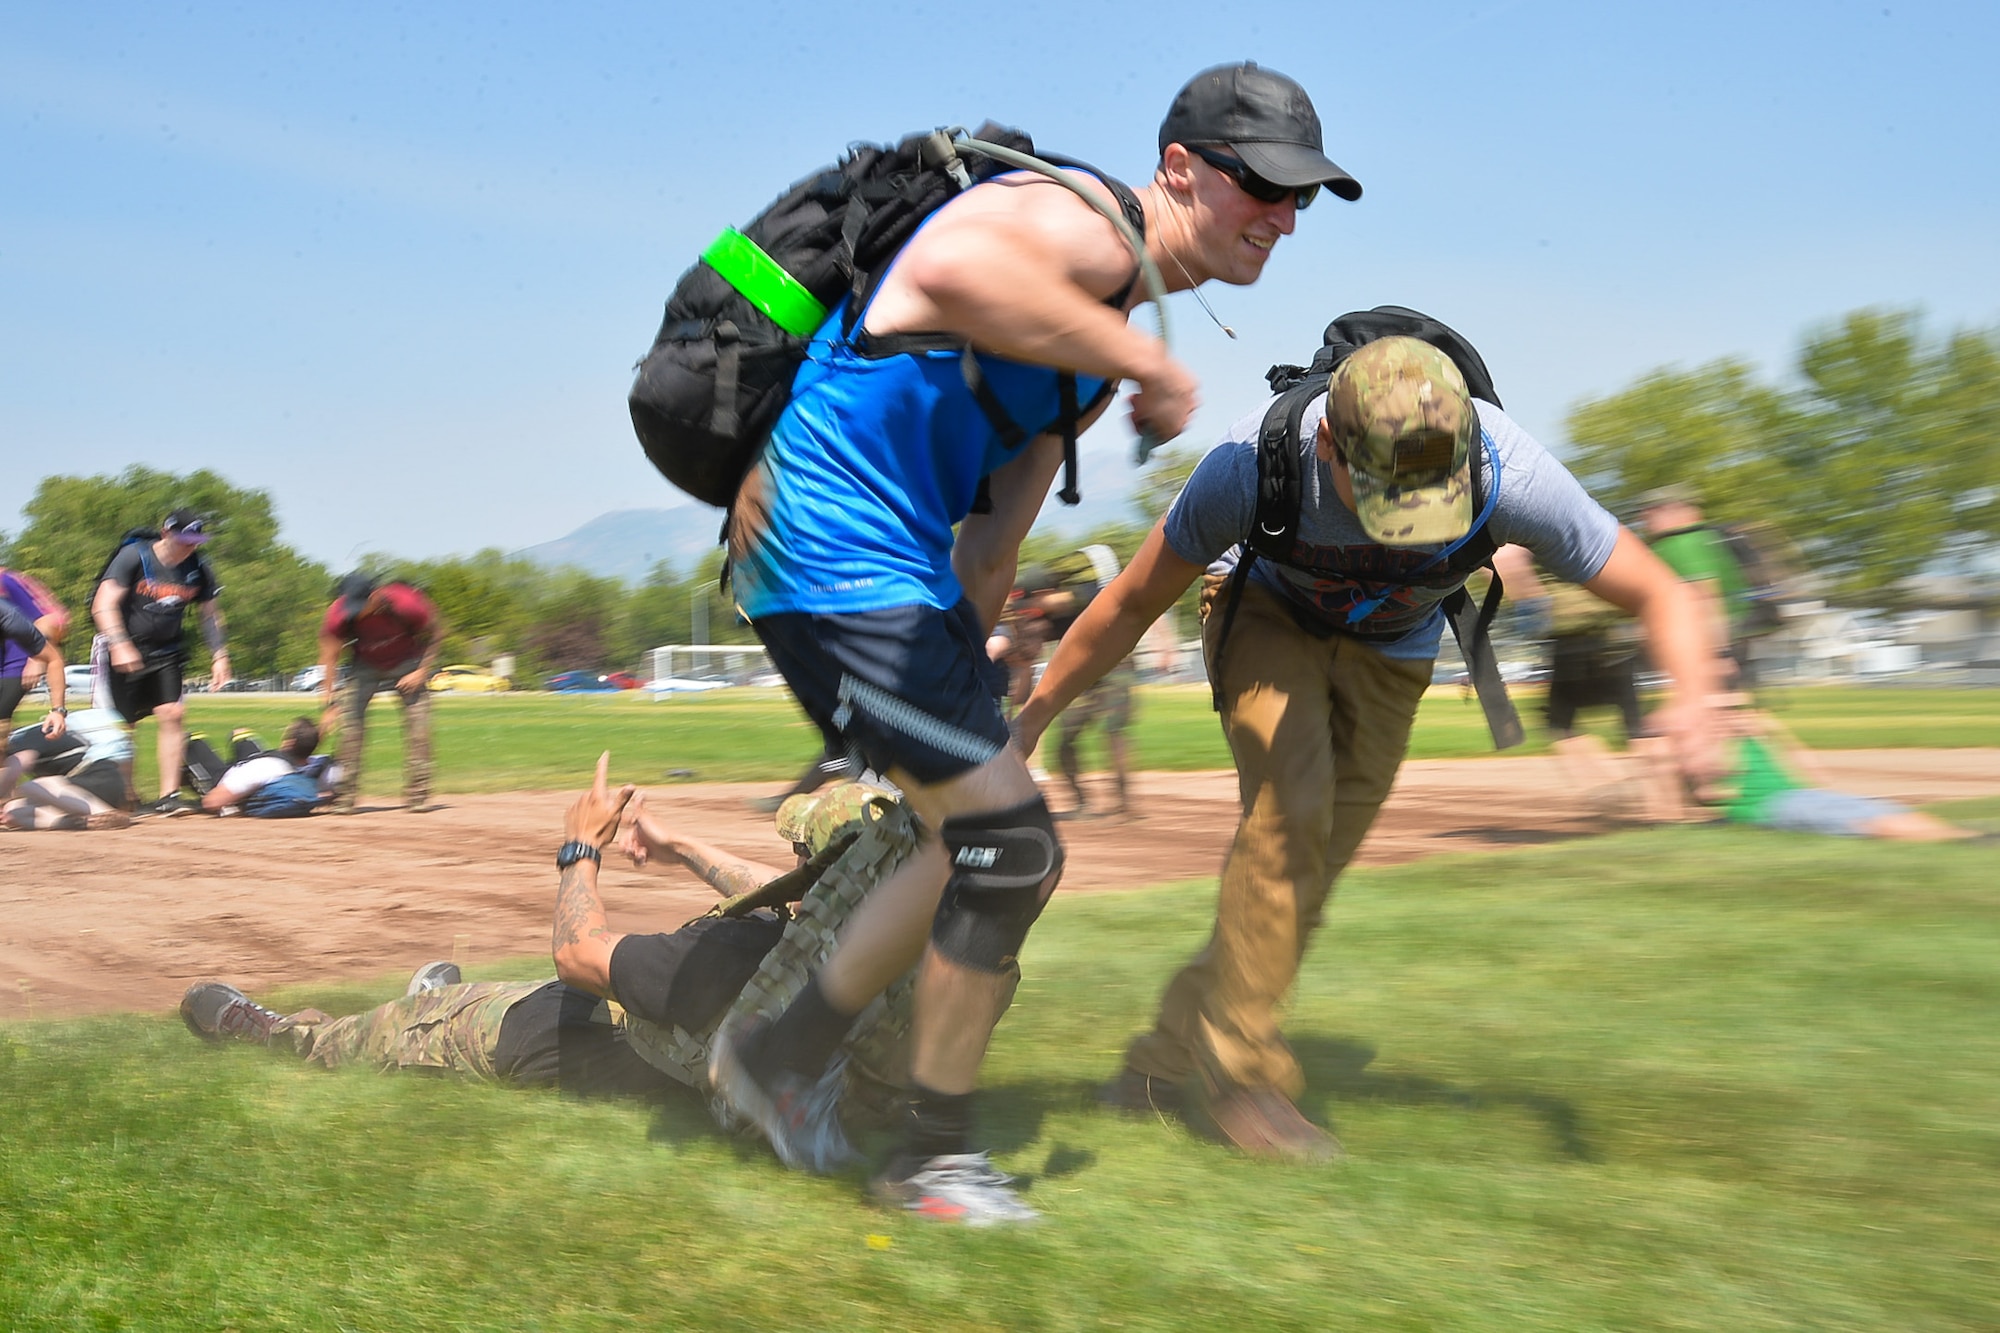 GoRuck participants transport a simulated casualty during a team cohesion challenge at Hill Air Force Base, Utah, Aug. 19, 2016.  (U.S. Air Force photo by R. Nial Bradshaw)